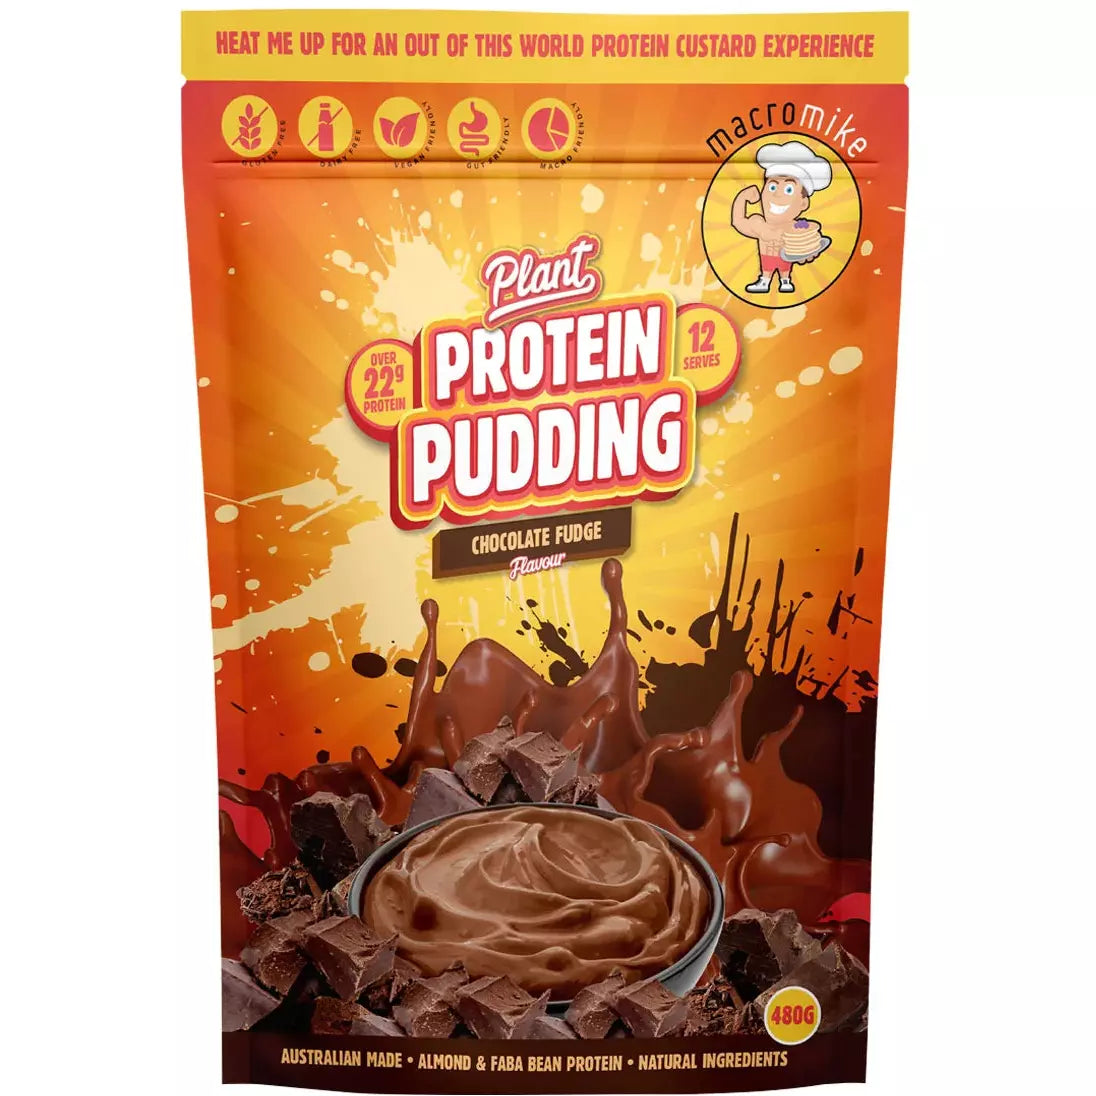 Macromike Protein Pudding